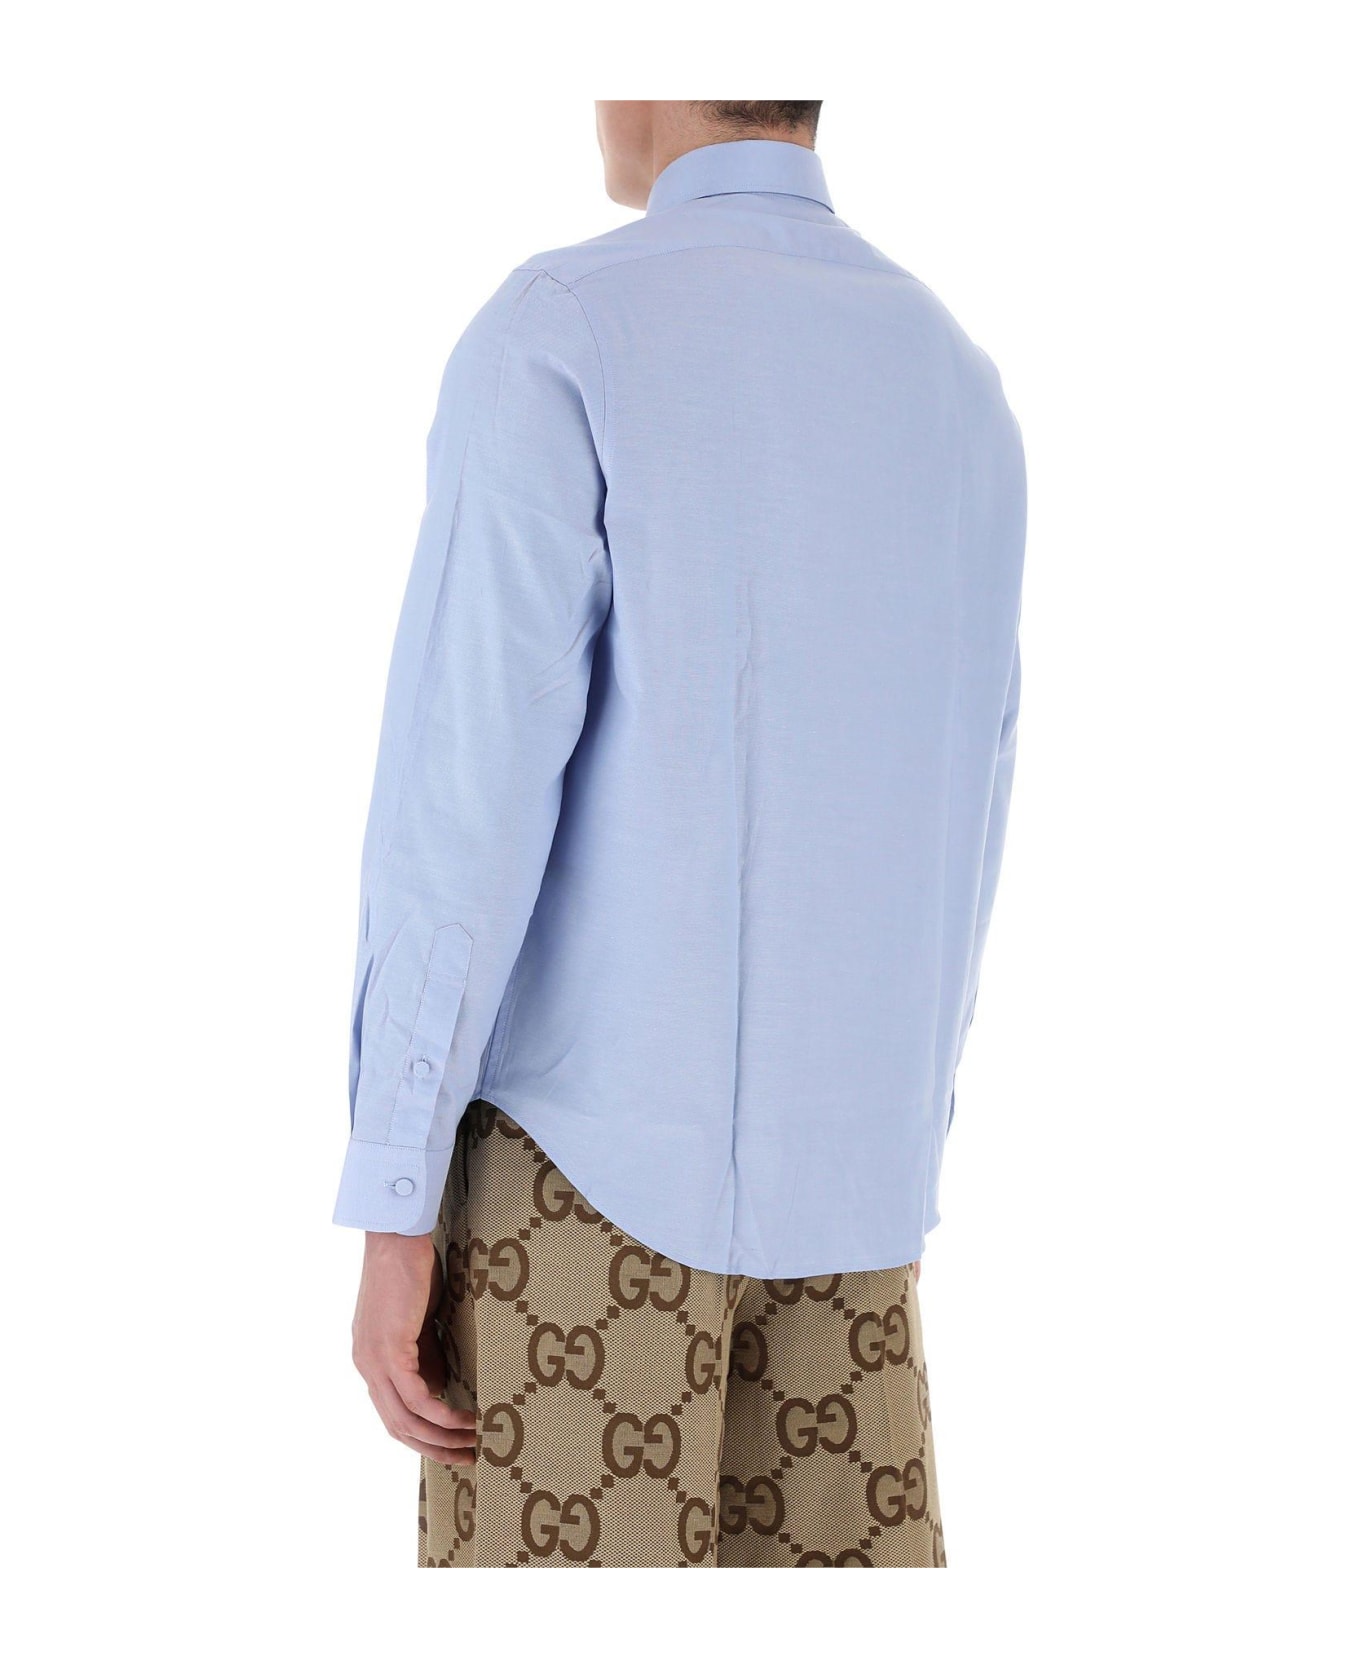 Gucci Shirt With Pocket - Blue